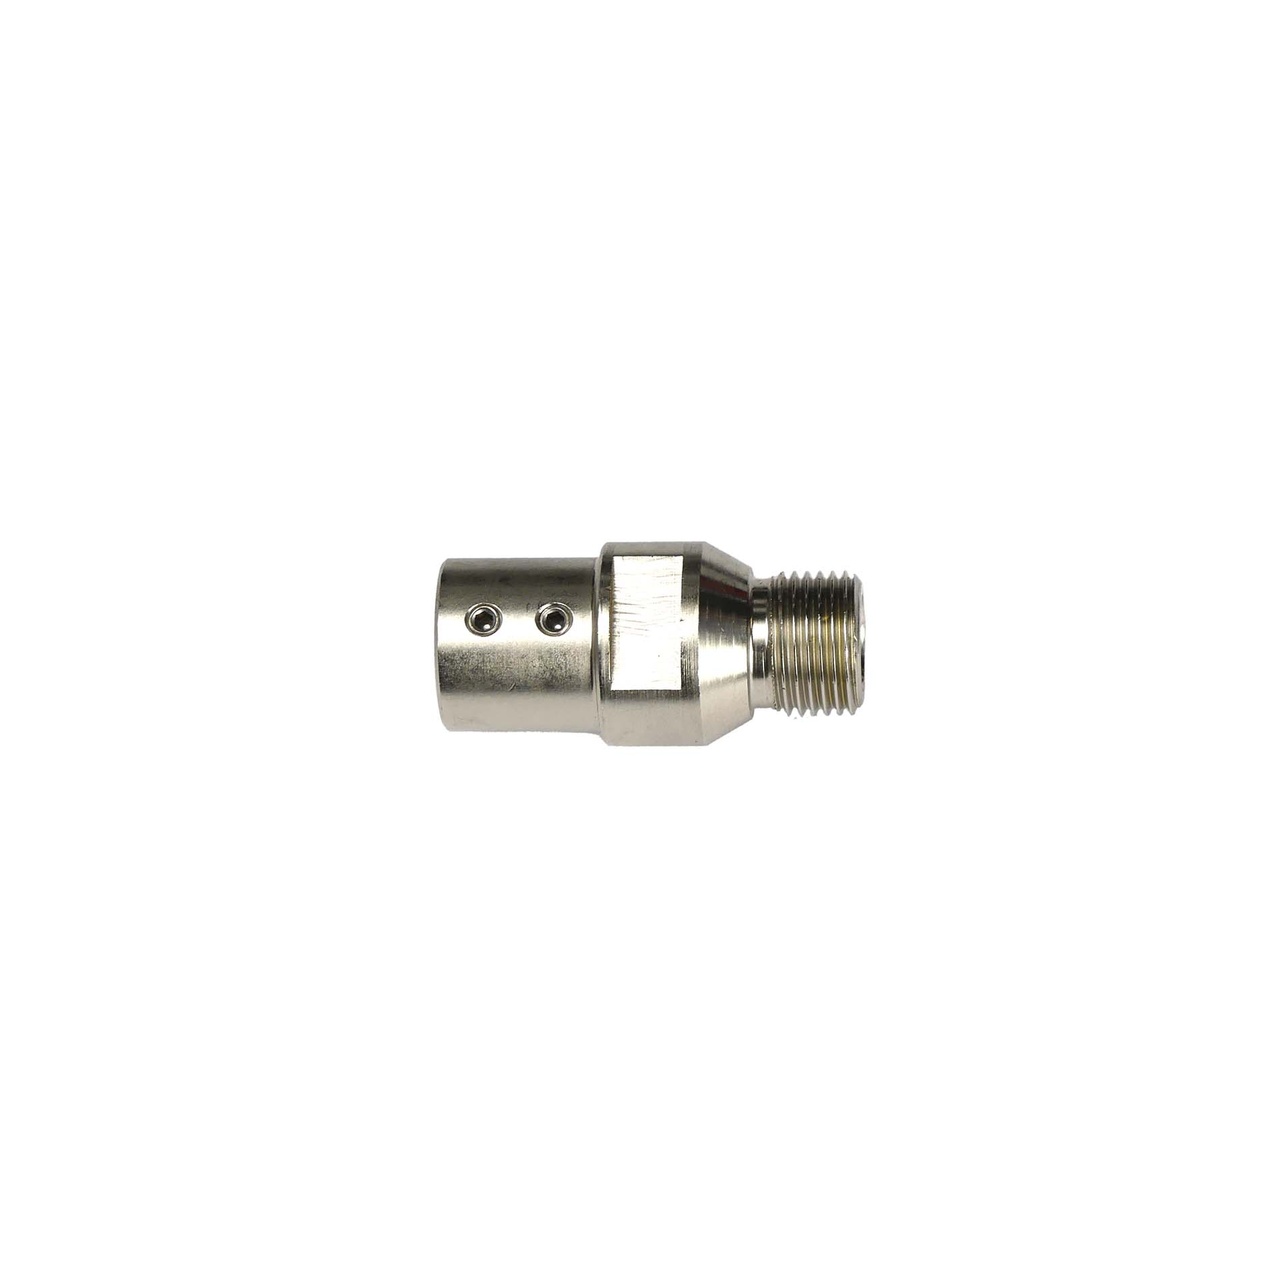 Adapter 1/2" - 10mm Cyl